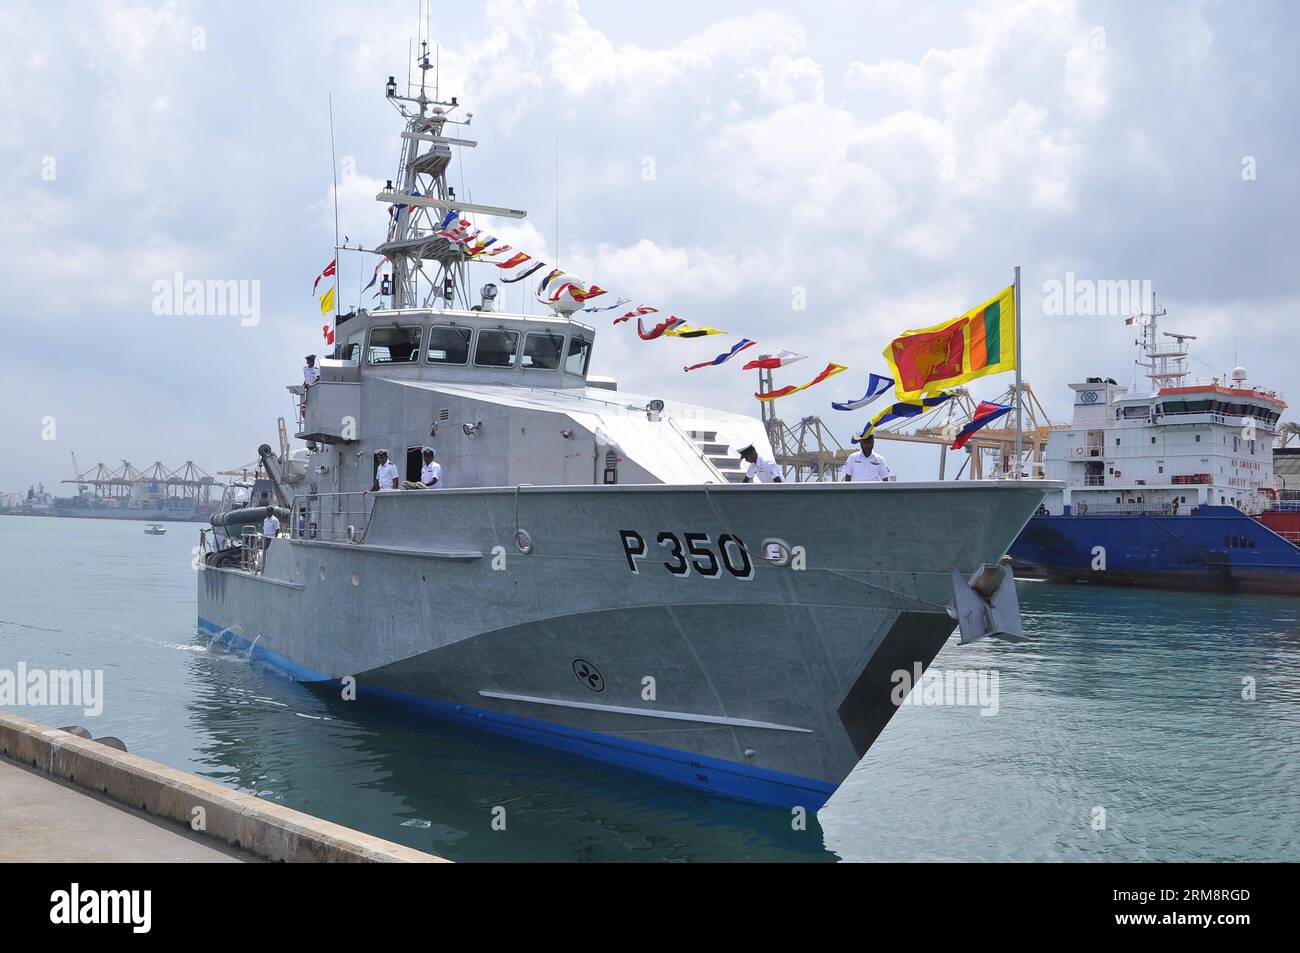 (140424) -- COLOMBO, April 24, 2014 (Xinhua) -- A Bay Class patrol vessel is seen at Colombo Port, Sri Lanka, April 24, 2014. The first Bay Class patrol vessel, a gift given by Australia to Sri Lanka to tackle people-smuggling in the region, arrived in Sri Lanka Thursday. (Xinhua/Gayan Sameera) SRI LANKA-COLOMBO-AUSTRALIAN PATROL VESSEL-PEOPLE SMUGGLING PUBLICATIONxNOTxINxCHN   Colombo April 24 2014 XINHUA a Bay Class Patrol Vessel IS Lakes AT Colombo Port Sri Lanka April 24 2014 The First Bay Class Patrol Vessel a Poison Given by Australia to Sri Lanka to Tackle Celebrities smuggling in The R Stock Photo